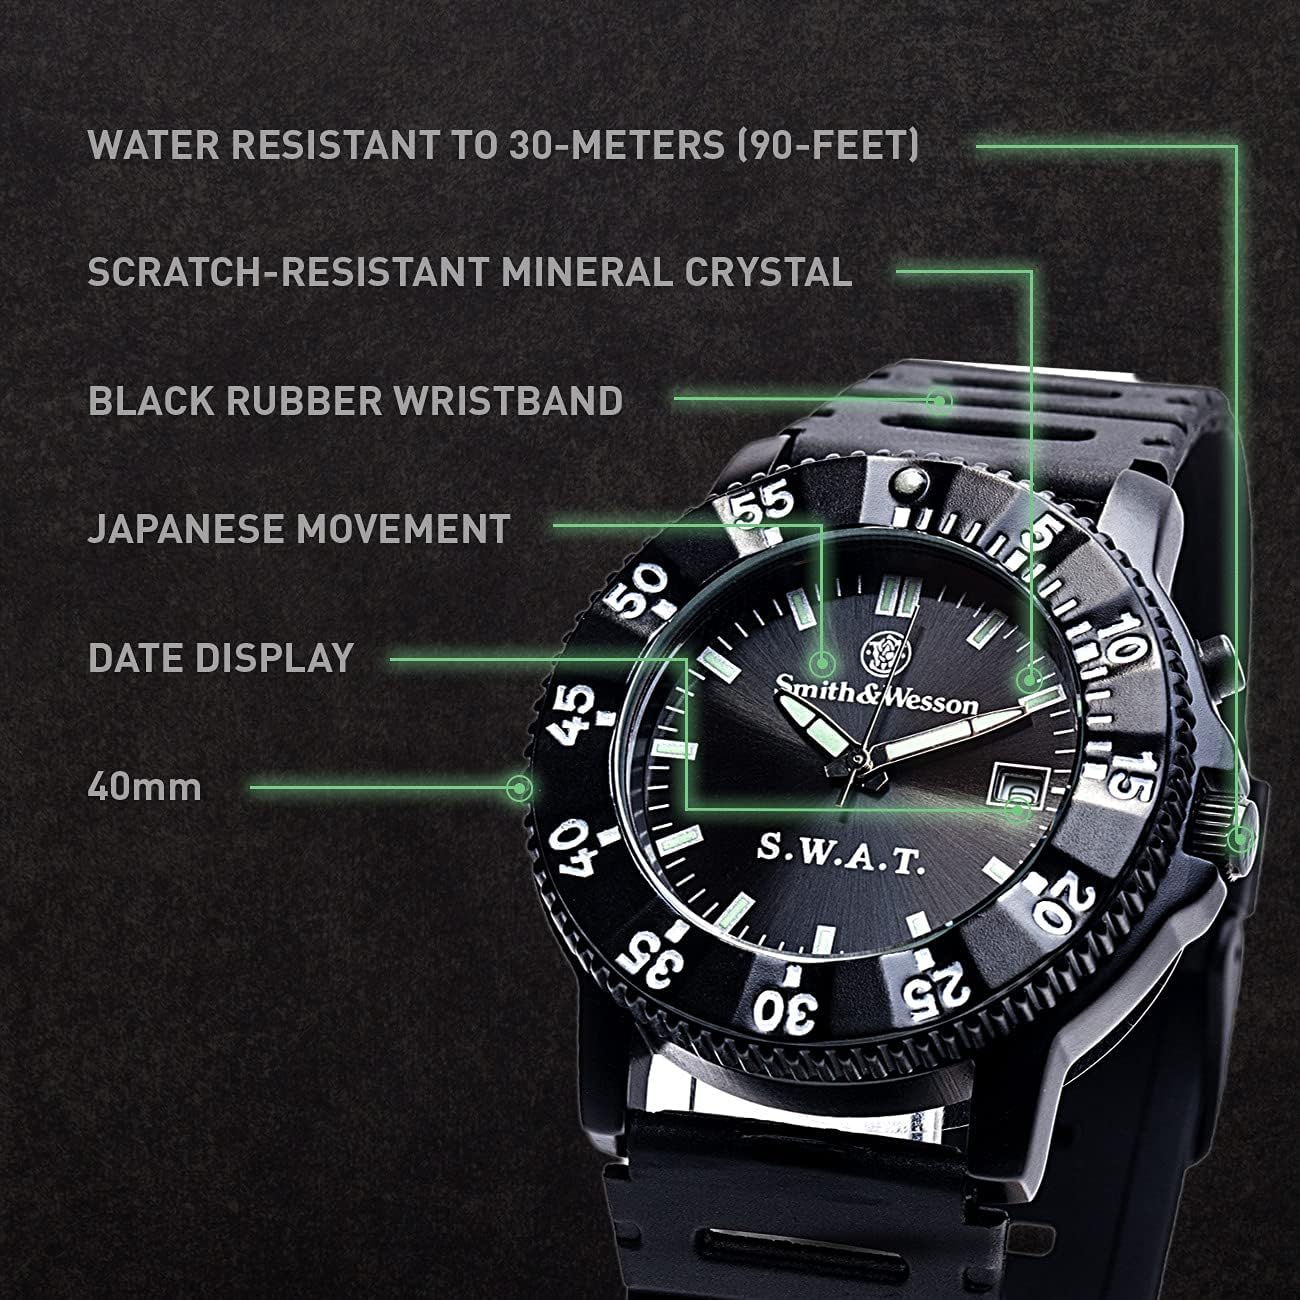 Smith & Wesson SWAT Watch w/ Rubber Wristband-Tac Essentials